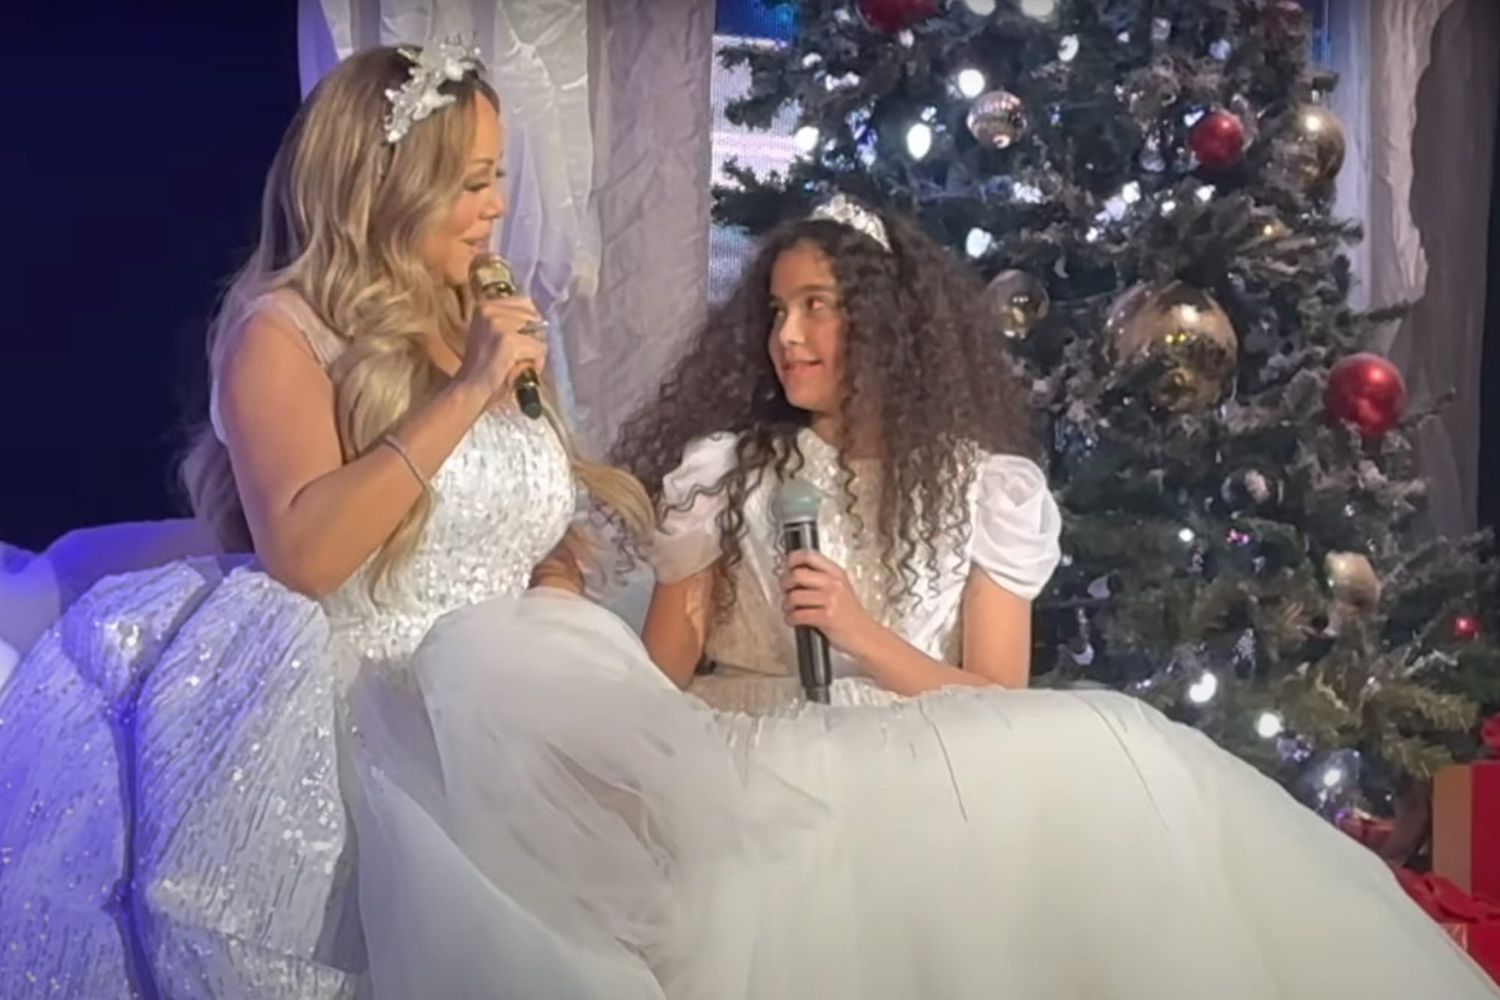 https://www.youtube.com/watch?v=zQCi1NFh_Zo&t=13s mariah carey sings holiday duet with daughter monroe. Credit: Youtube